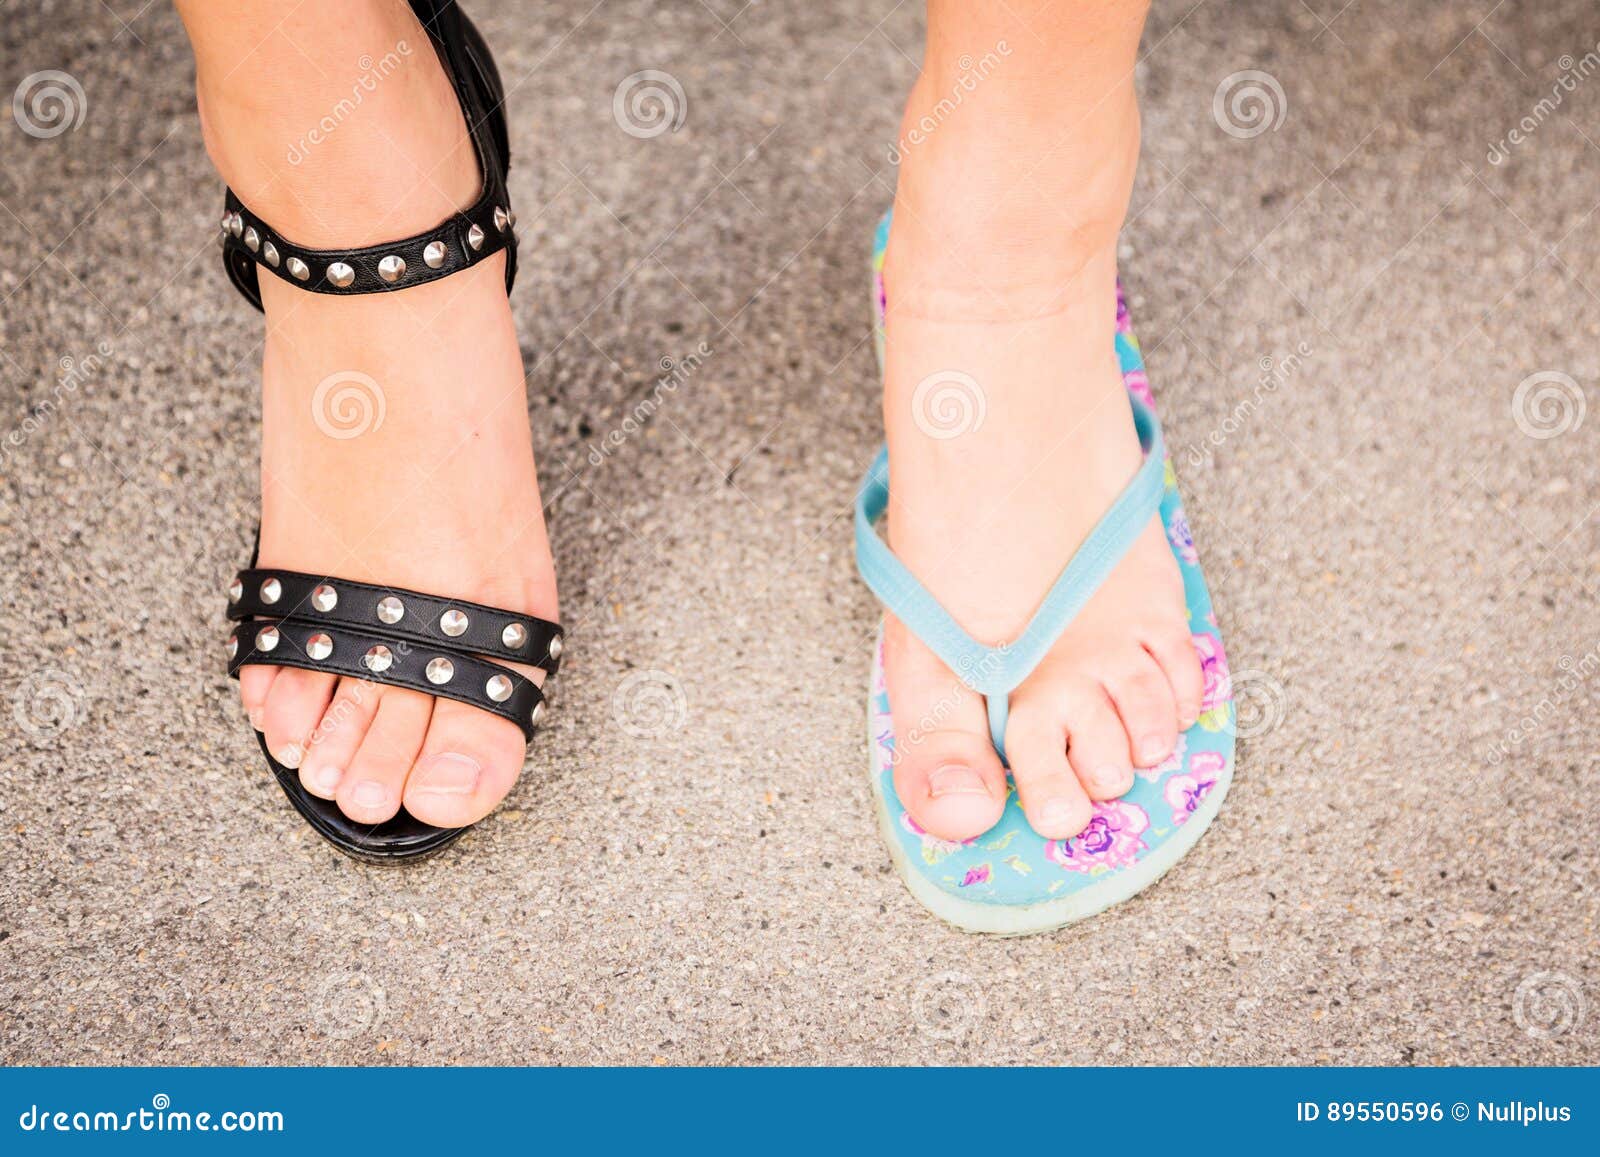 Poorly Matched Shoes stock photo. Image of shoe, mismatch - 89550596